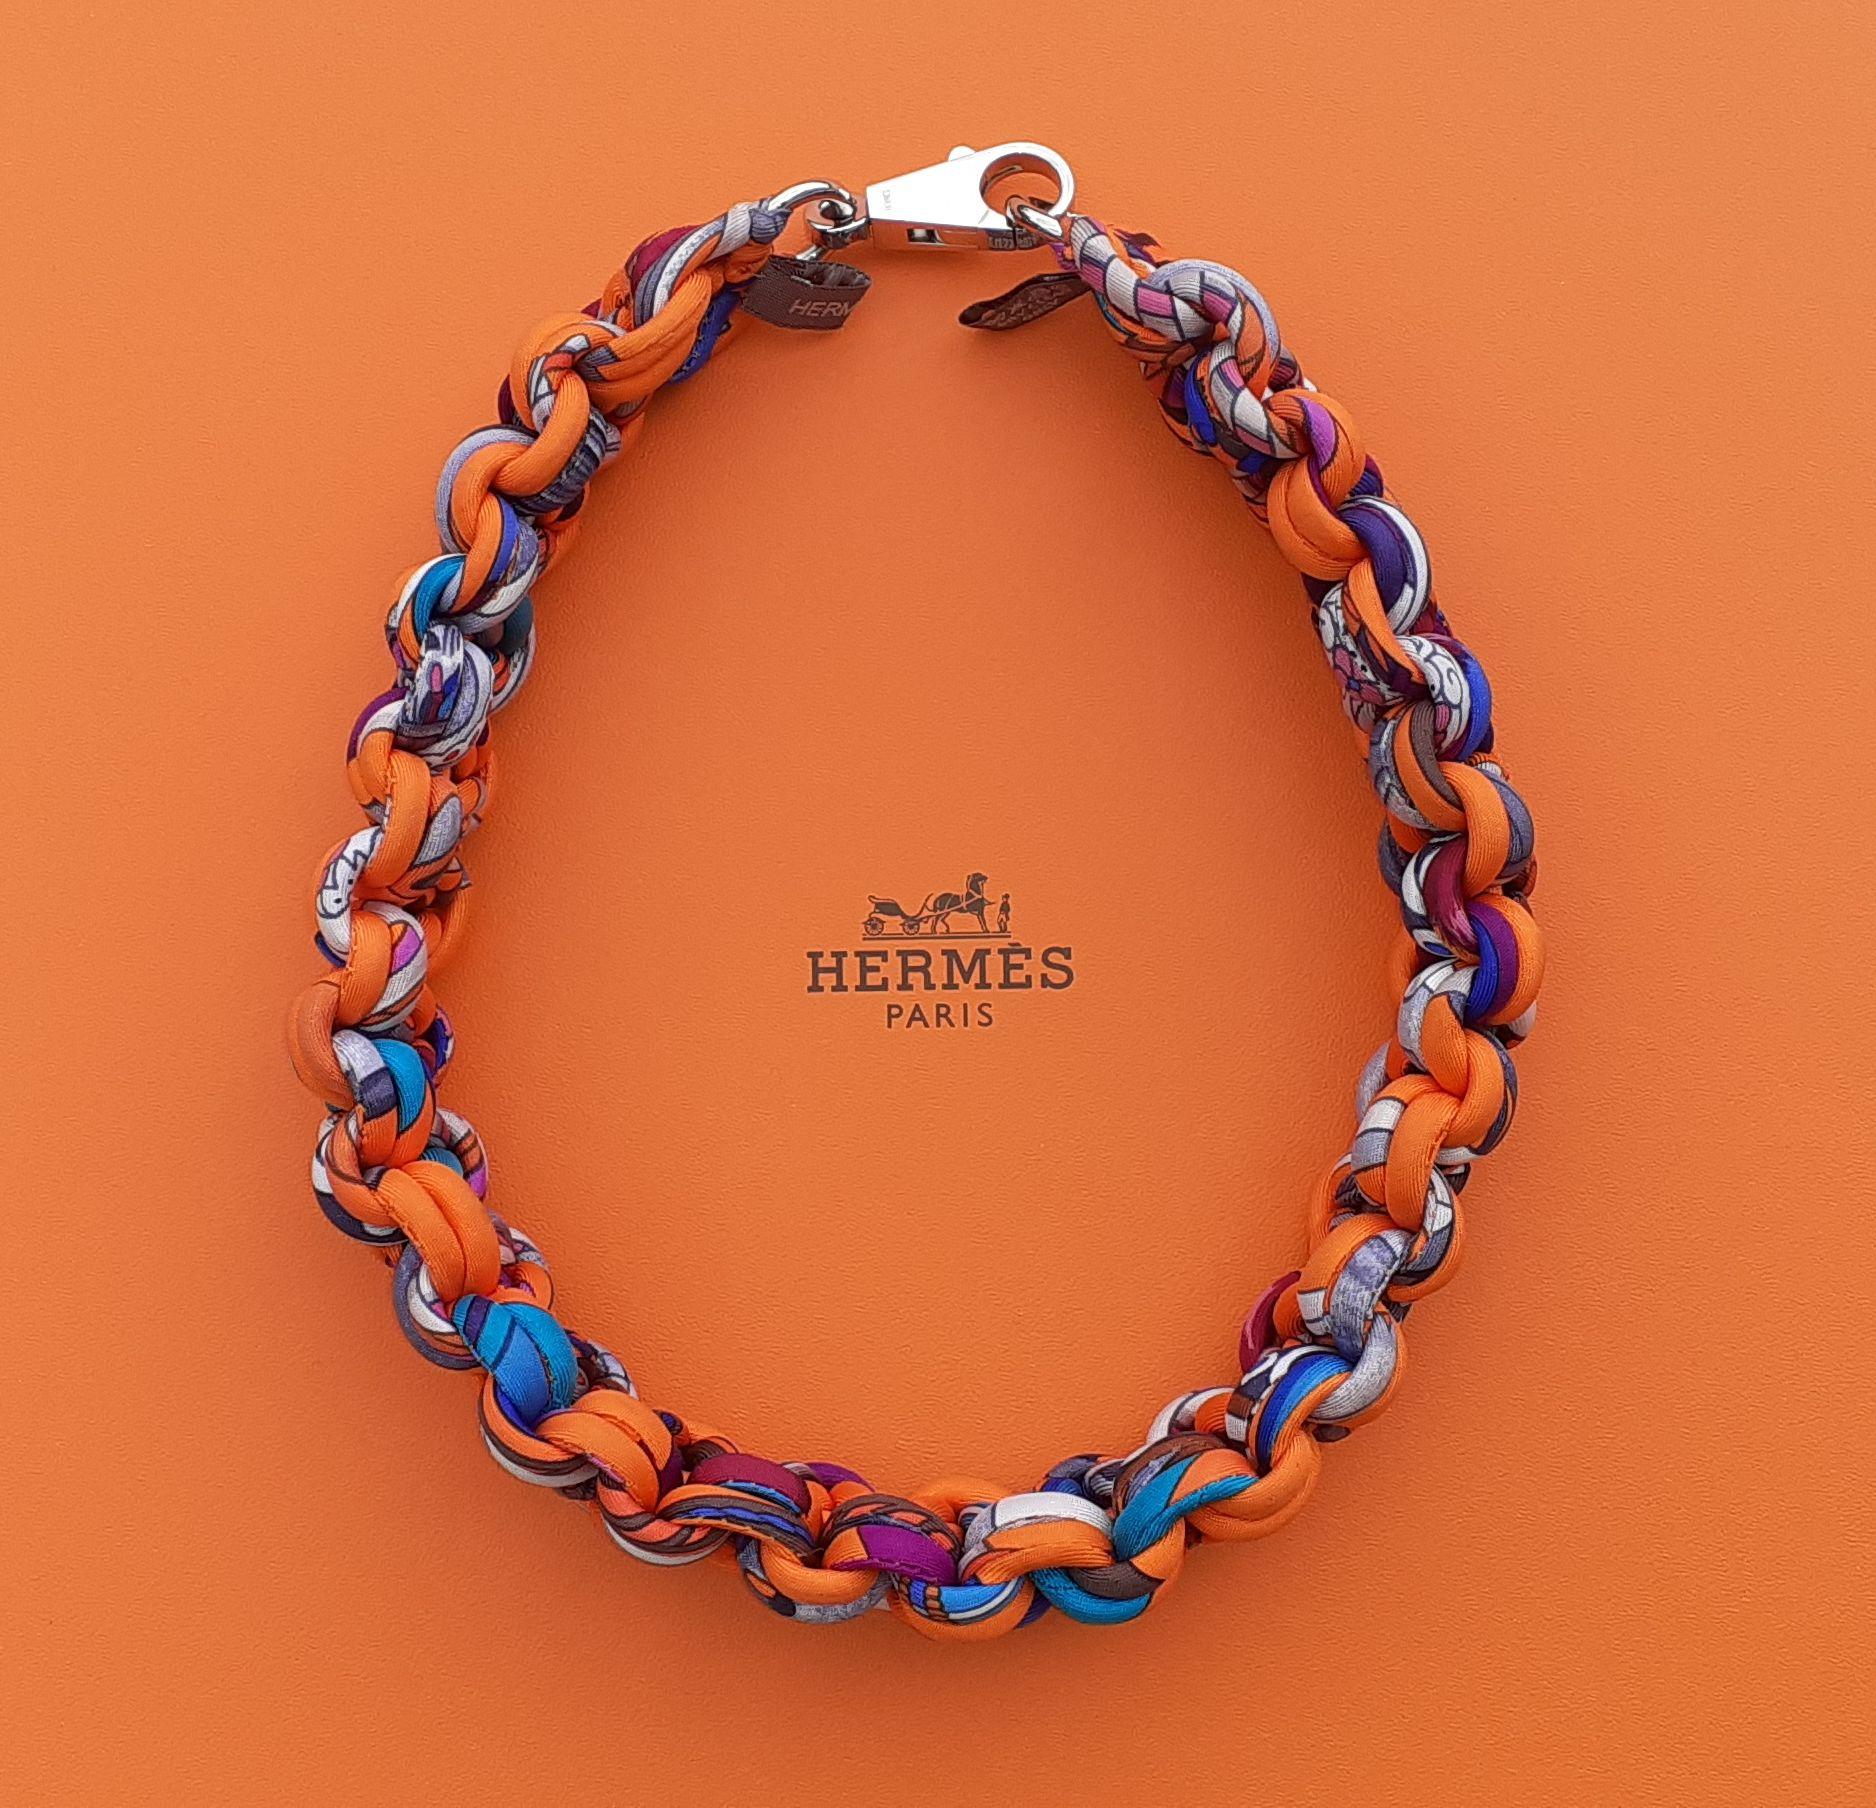 Rare and Beautiful Authentic Hermès Necklace

Pattern: sophisticated braid

Made in France

Made of 100% Silk

Colorways: Orange, Purple, Blue, Turquoise, Grey

Carabiner clasp in siler tone metal

